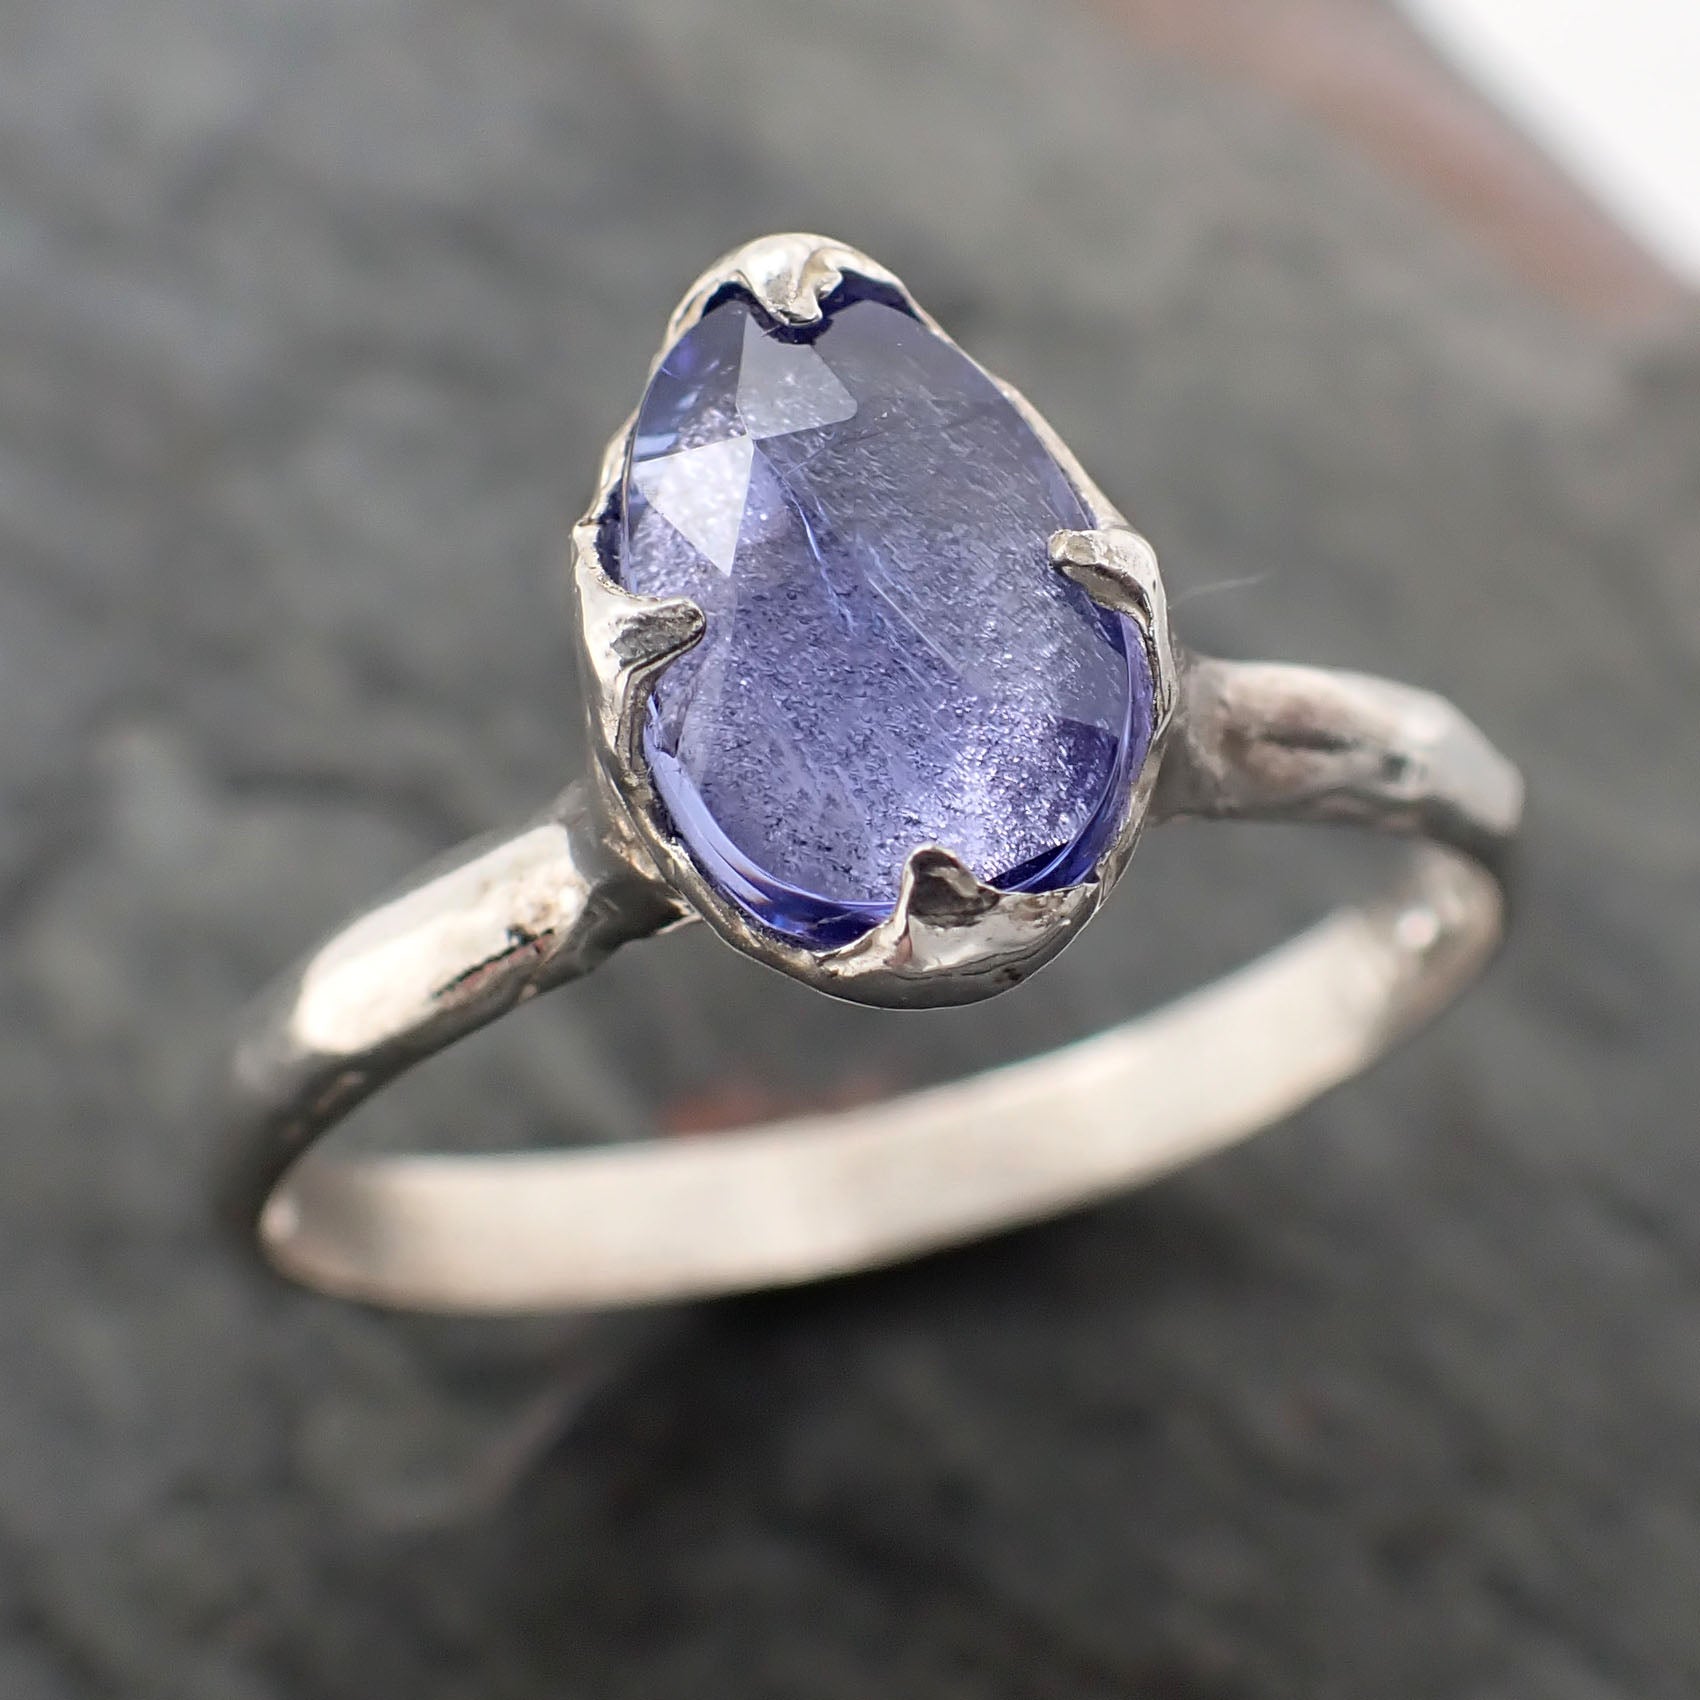 Fancy cut Tanzanite Sterling Silver Ring Gemstone Solitaire recycled c ...